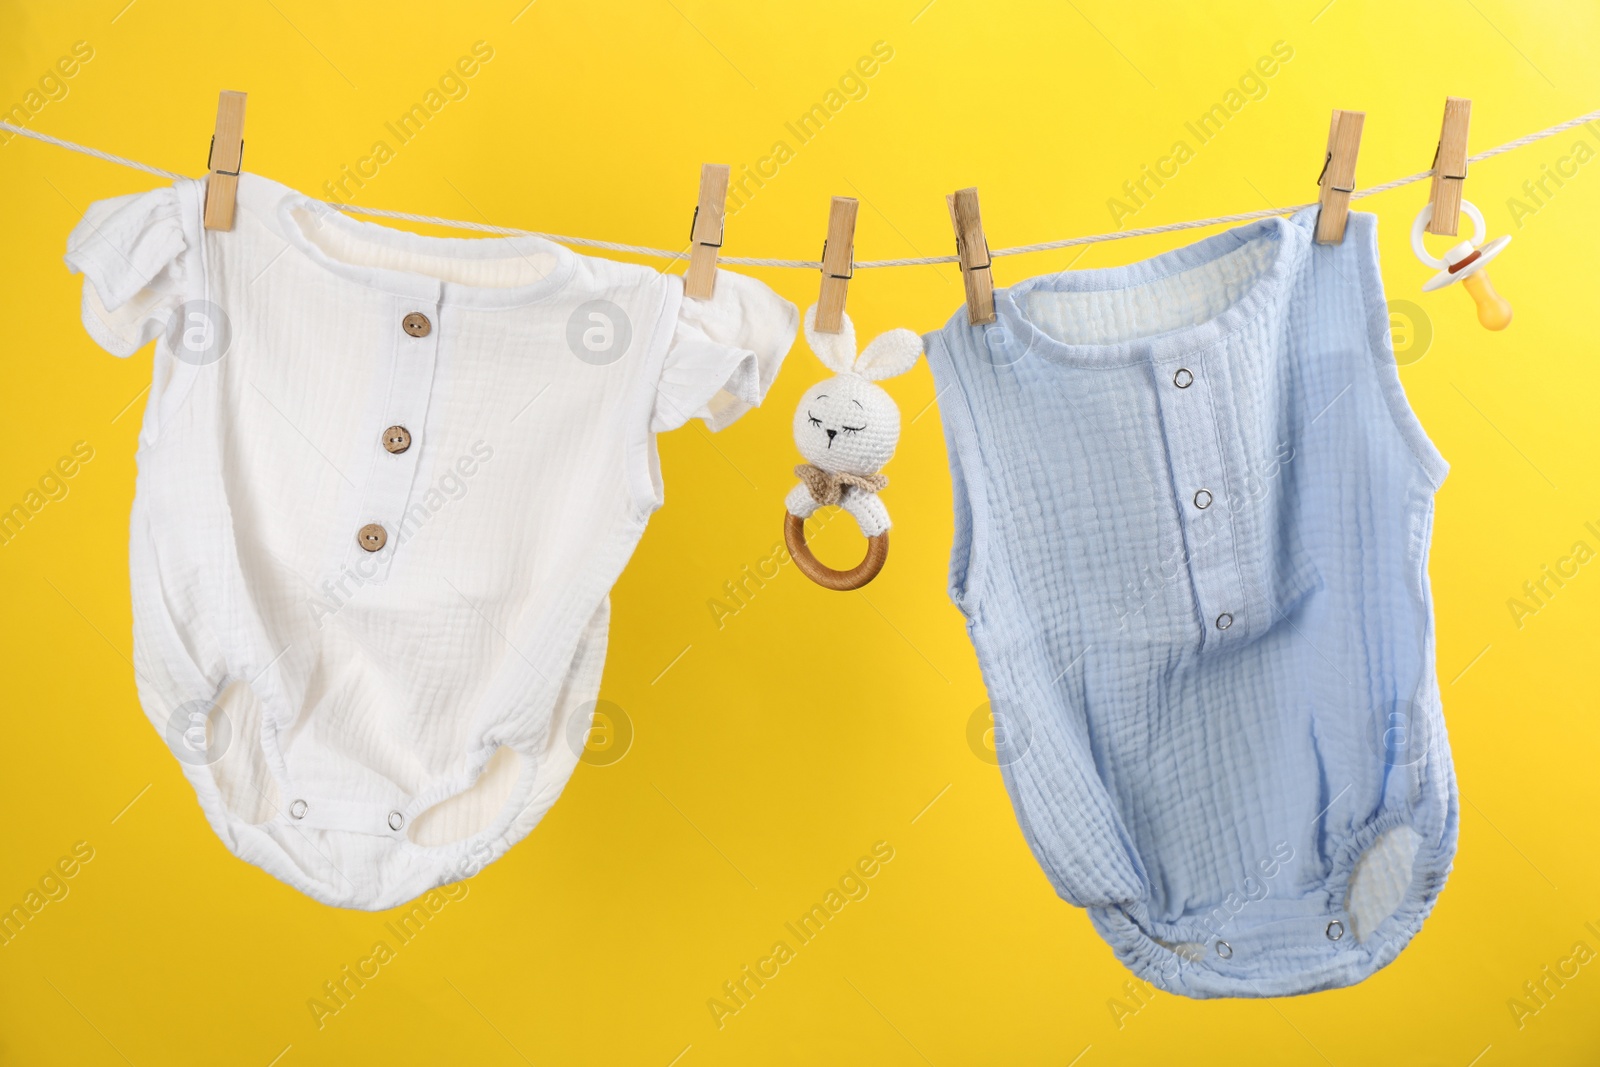 Photo of Baby clothes and accessories hanging on washing line against yellow background